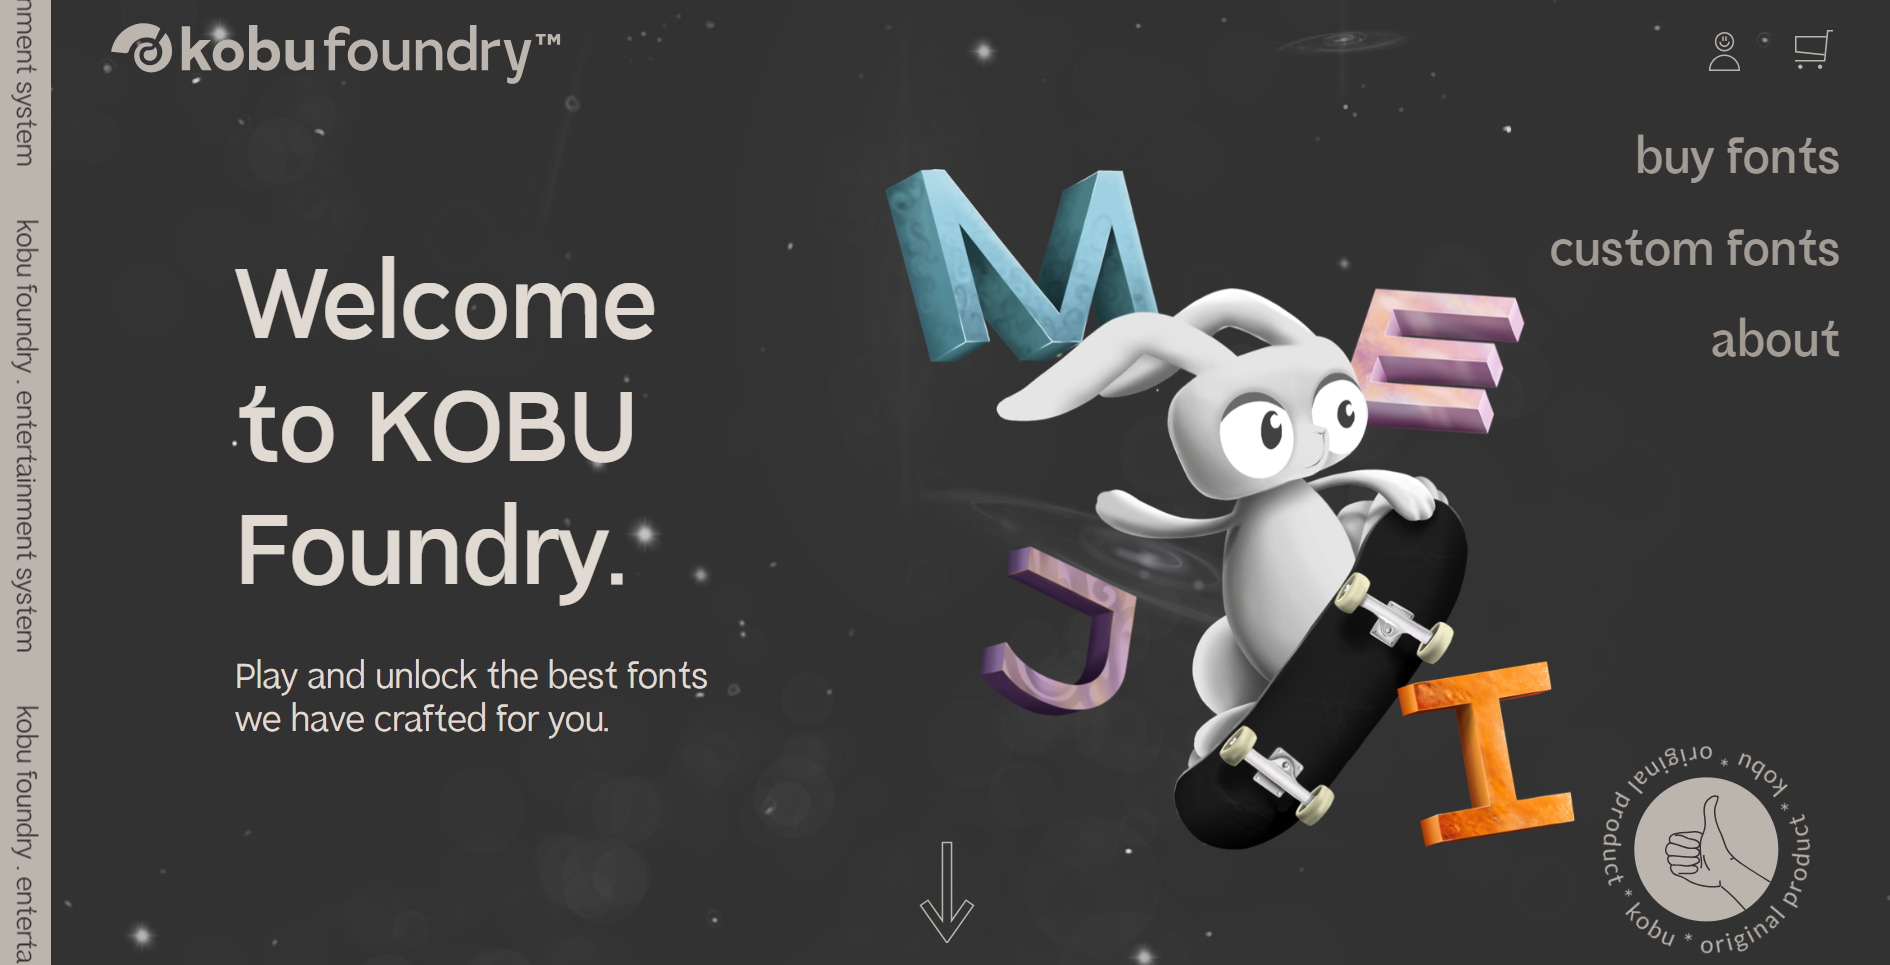 Kobu Foundry is another one of the sample WordPress sites on our list that uses a custom theme.